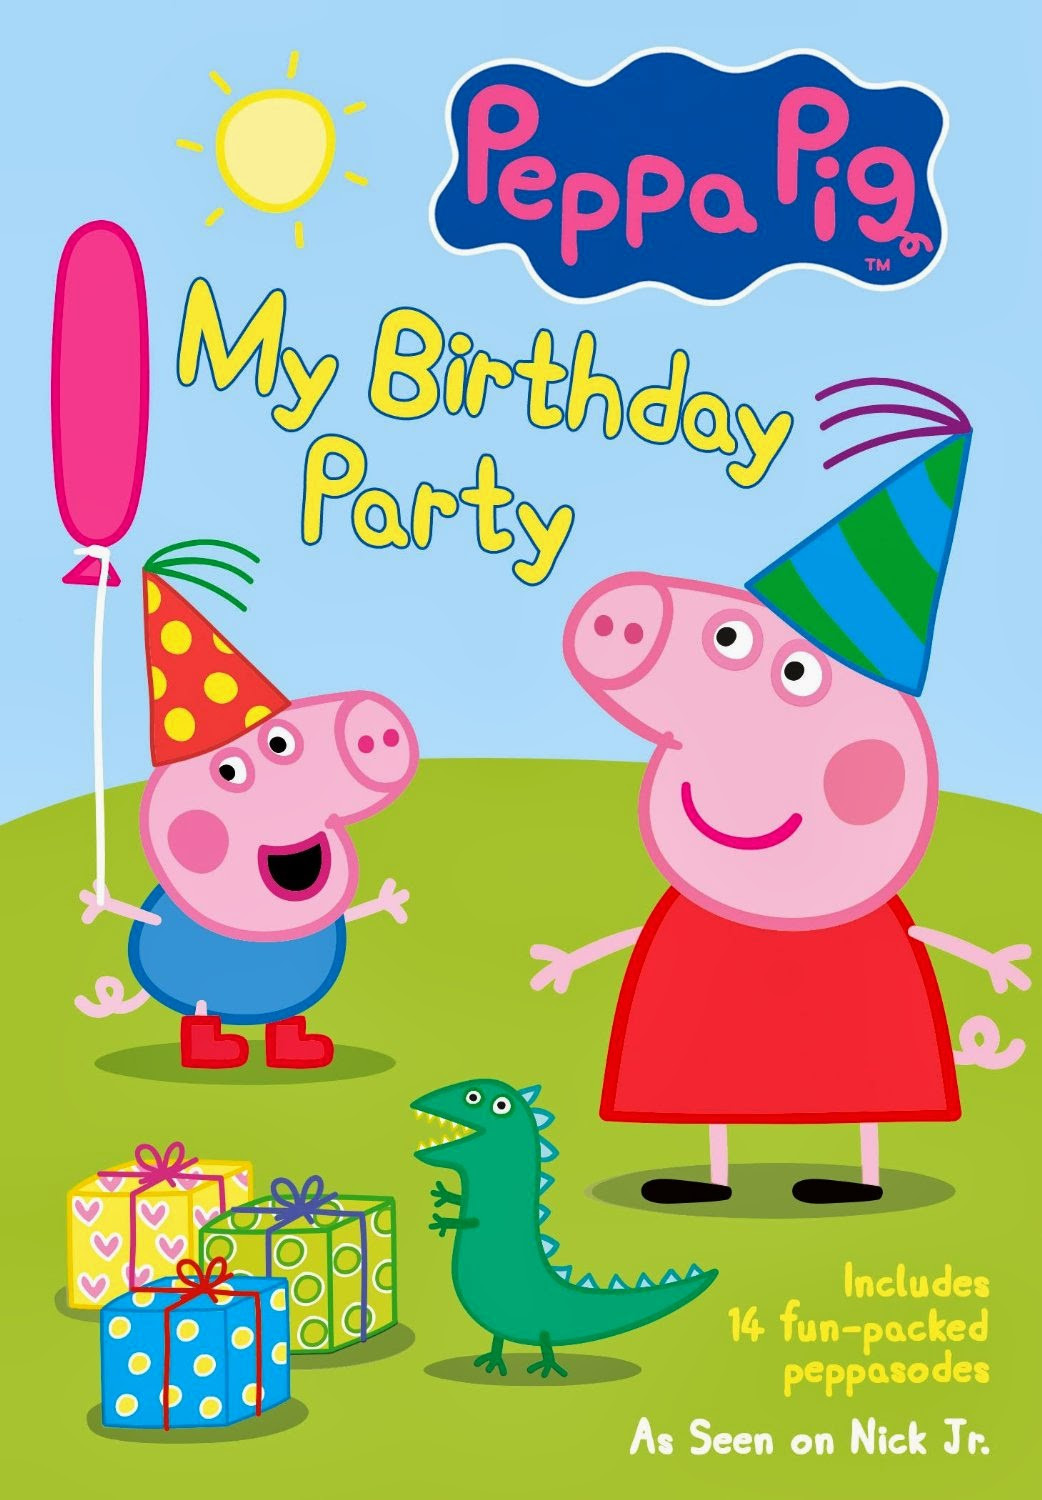 Peppa Pig My Birthday Party
 Thanks Mail Carrier